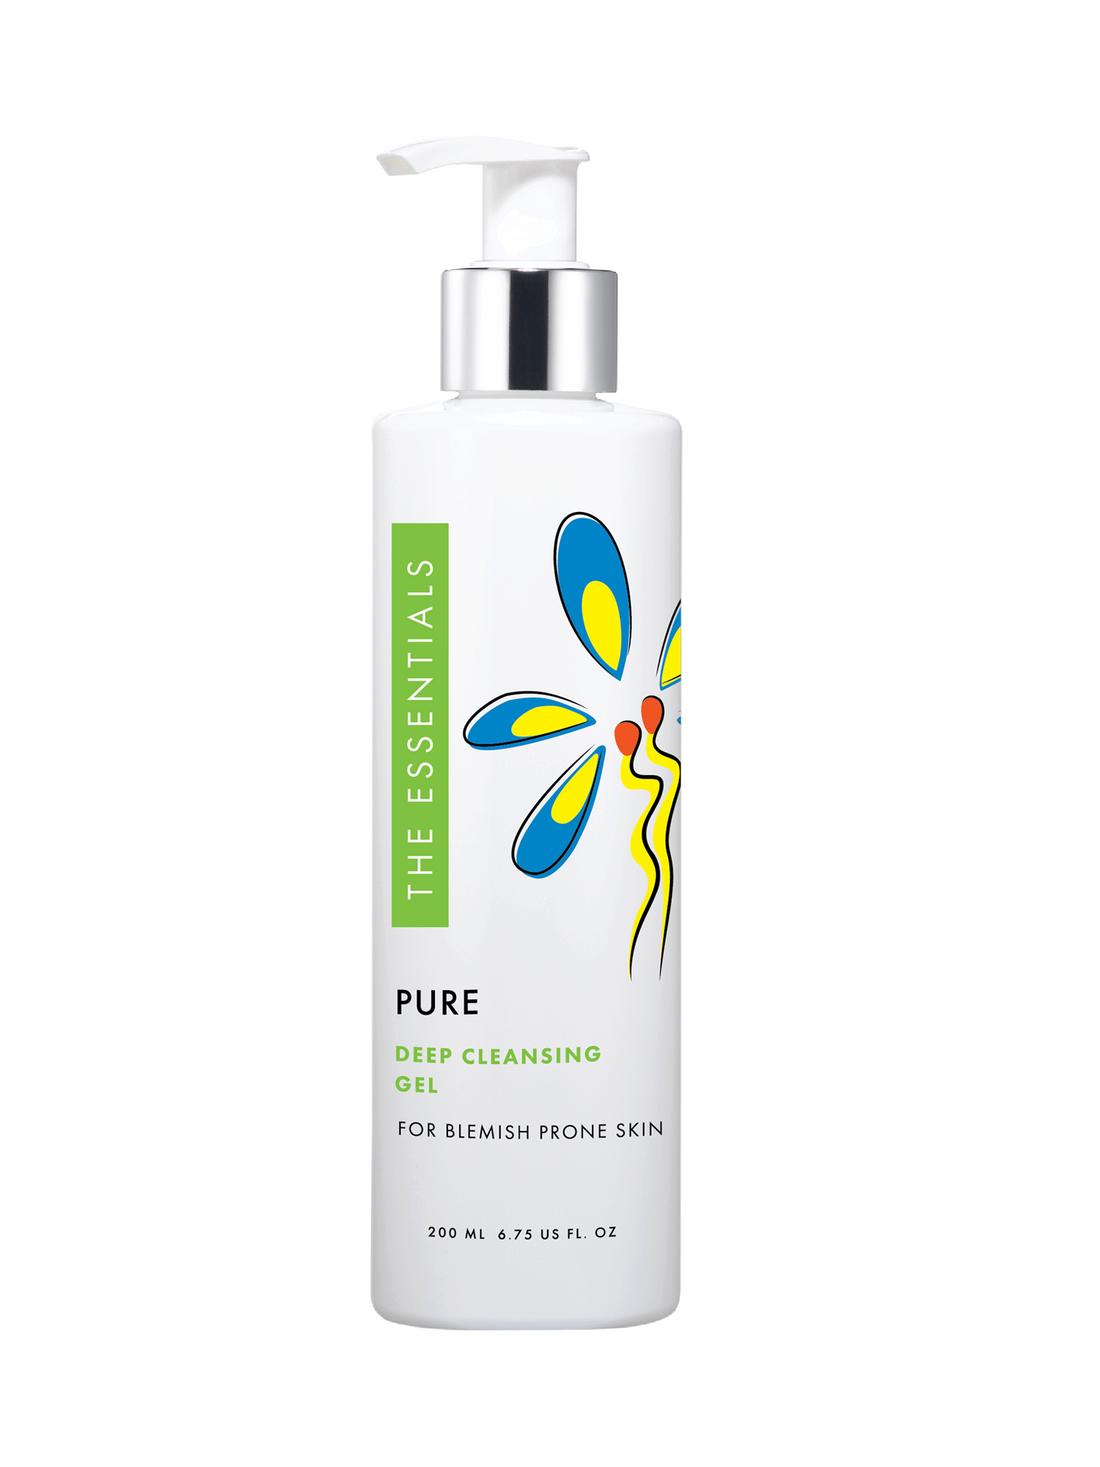 PURE Deep Cleansing Gel – For Blemish Prone Skin